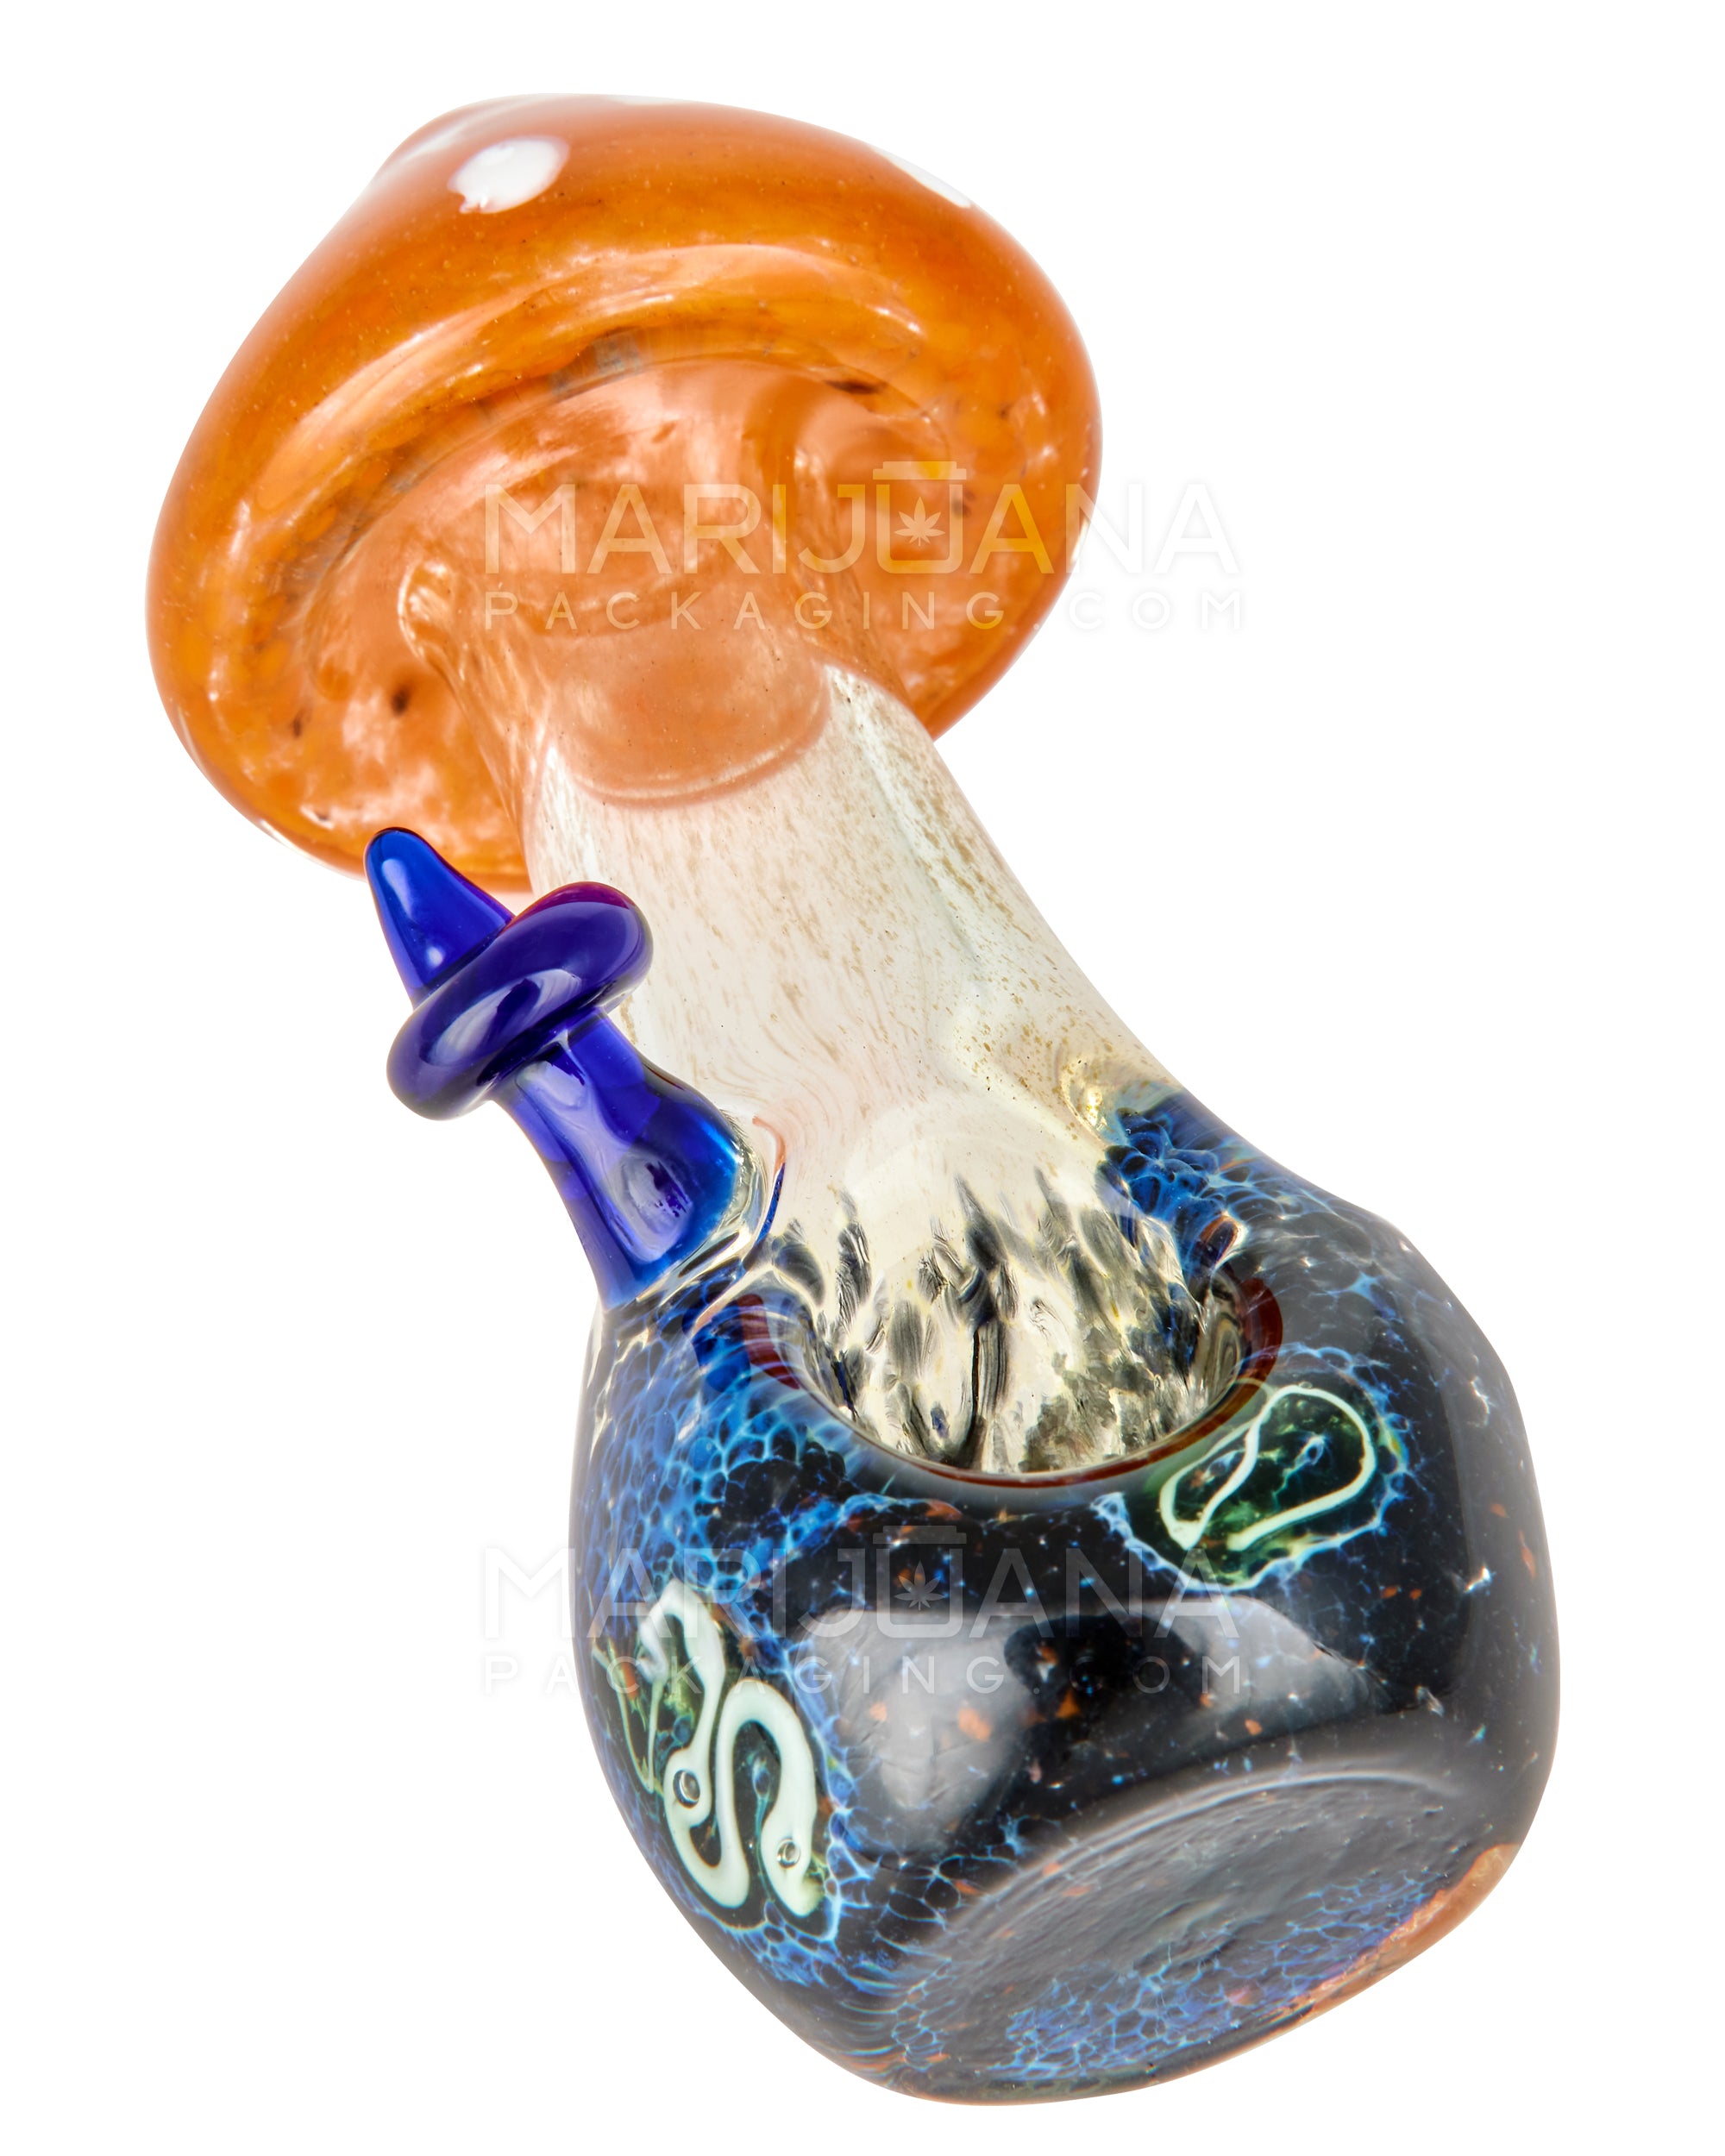 Frit & Multi Fumed Mushroom Hand Pipe w/ Ribboning & Glass Handle | 4in Long - Glass - Assorted - 8